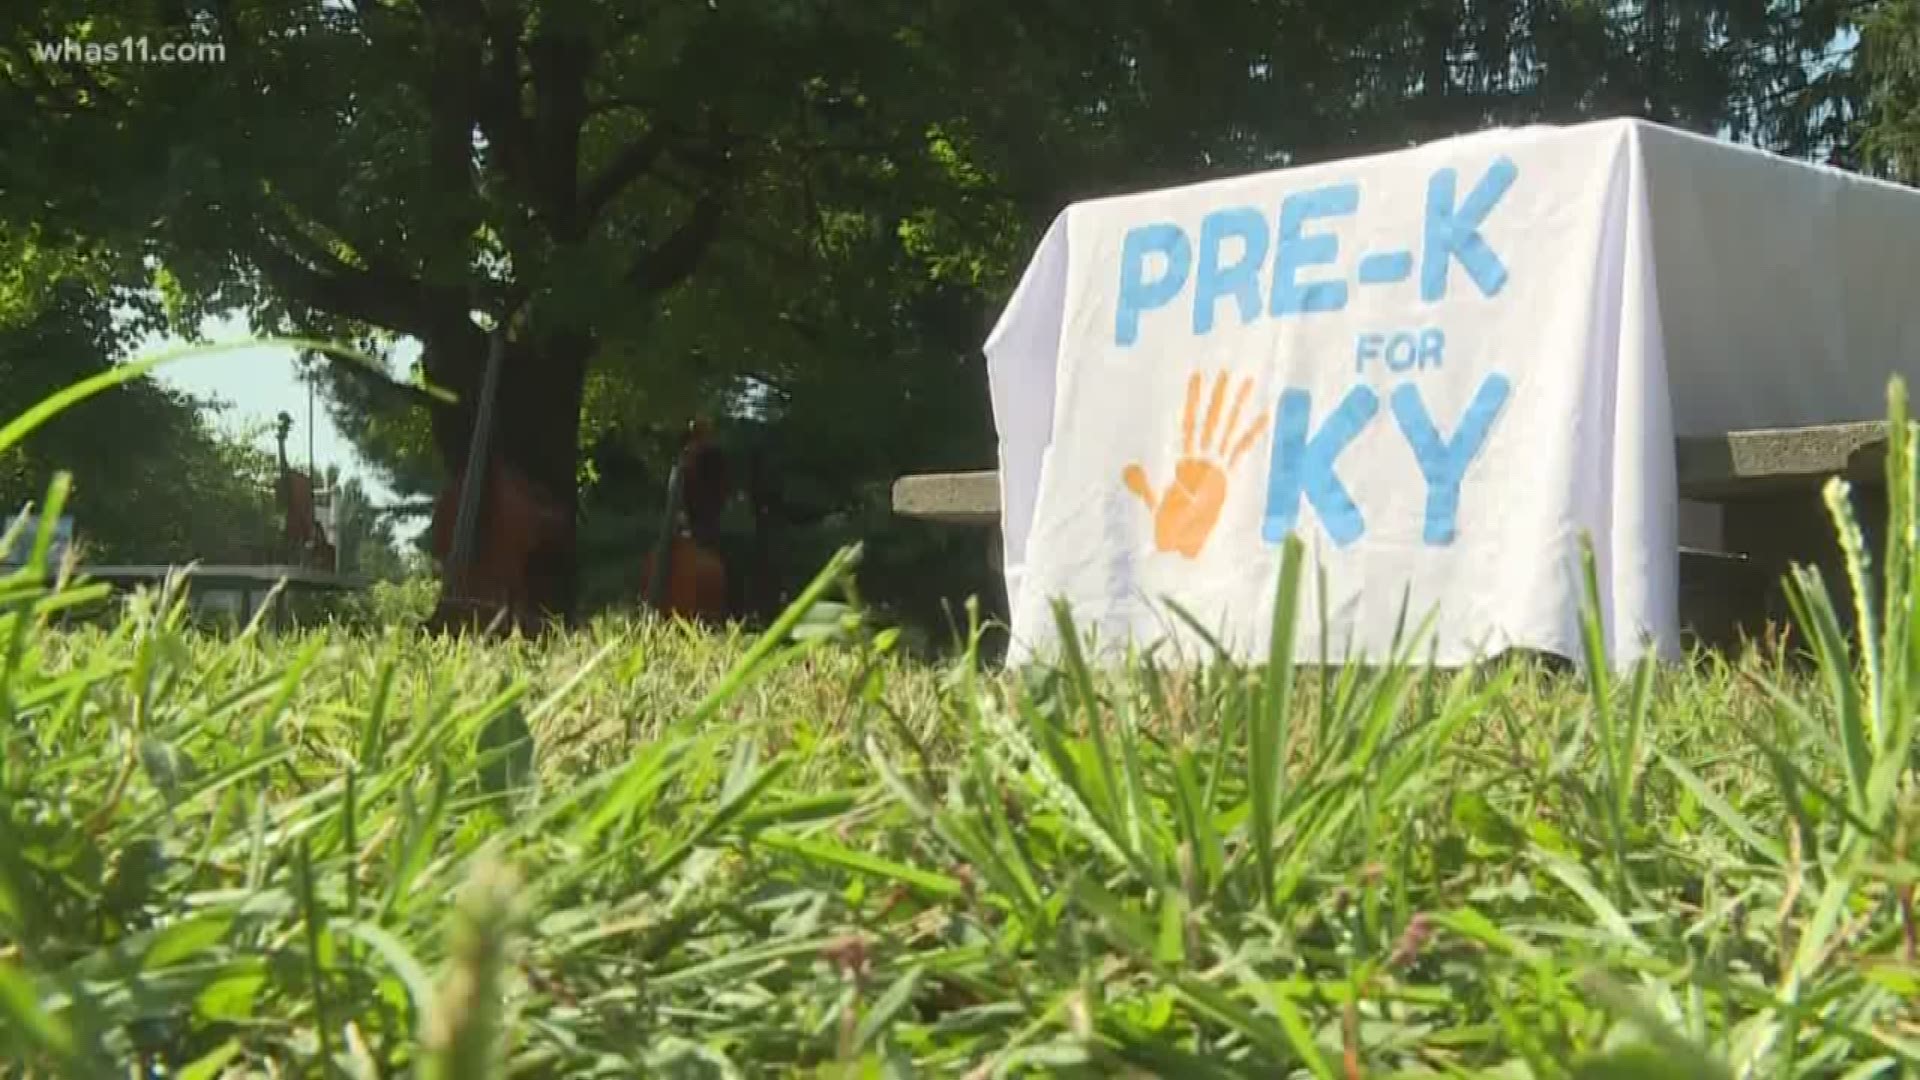 Though the 2020 Legislative Session is months away, Kentucky lawmakers are getting to work early promoting universal pre-k.